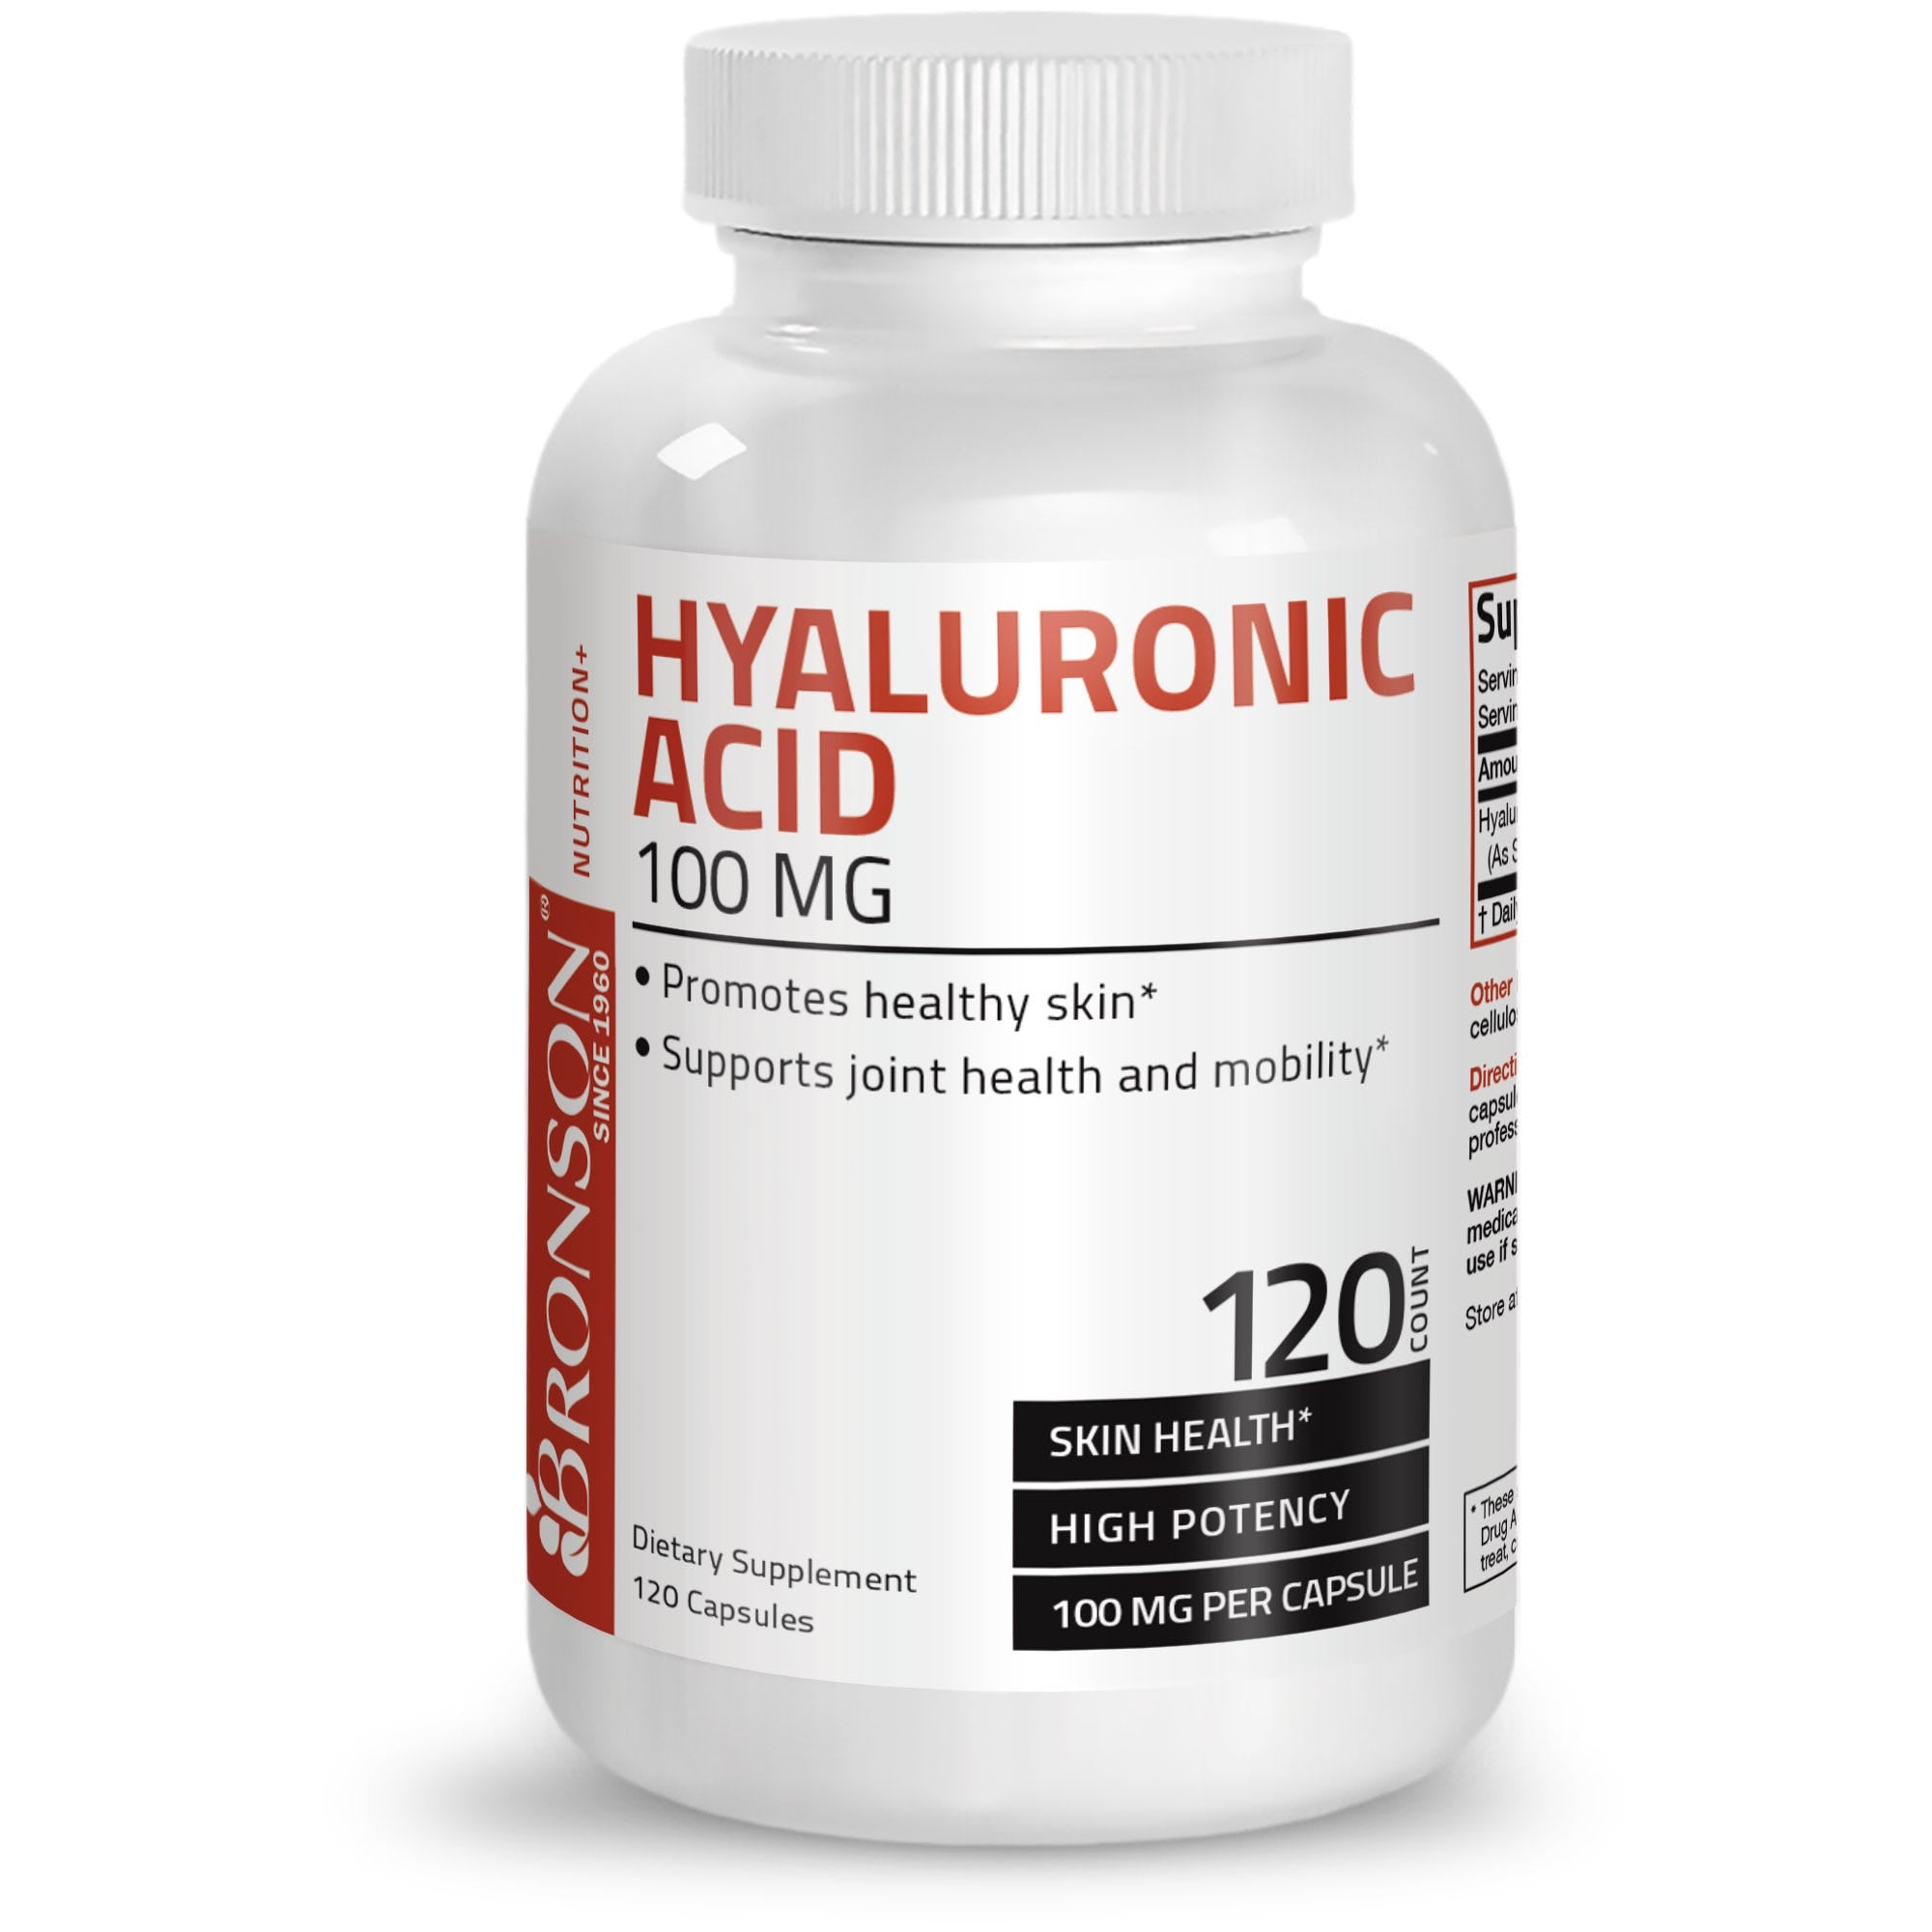 Hyaluronic Acid High Potency - 100 mg - 120 Capsules view 1 of 4